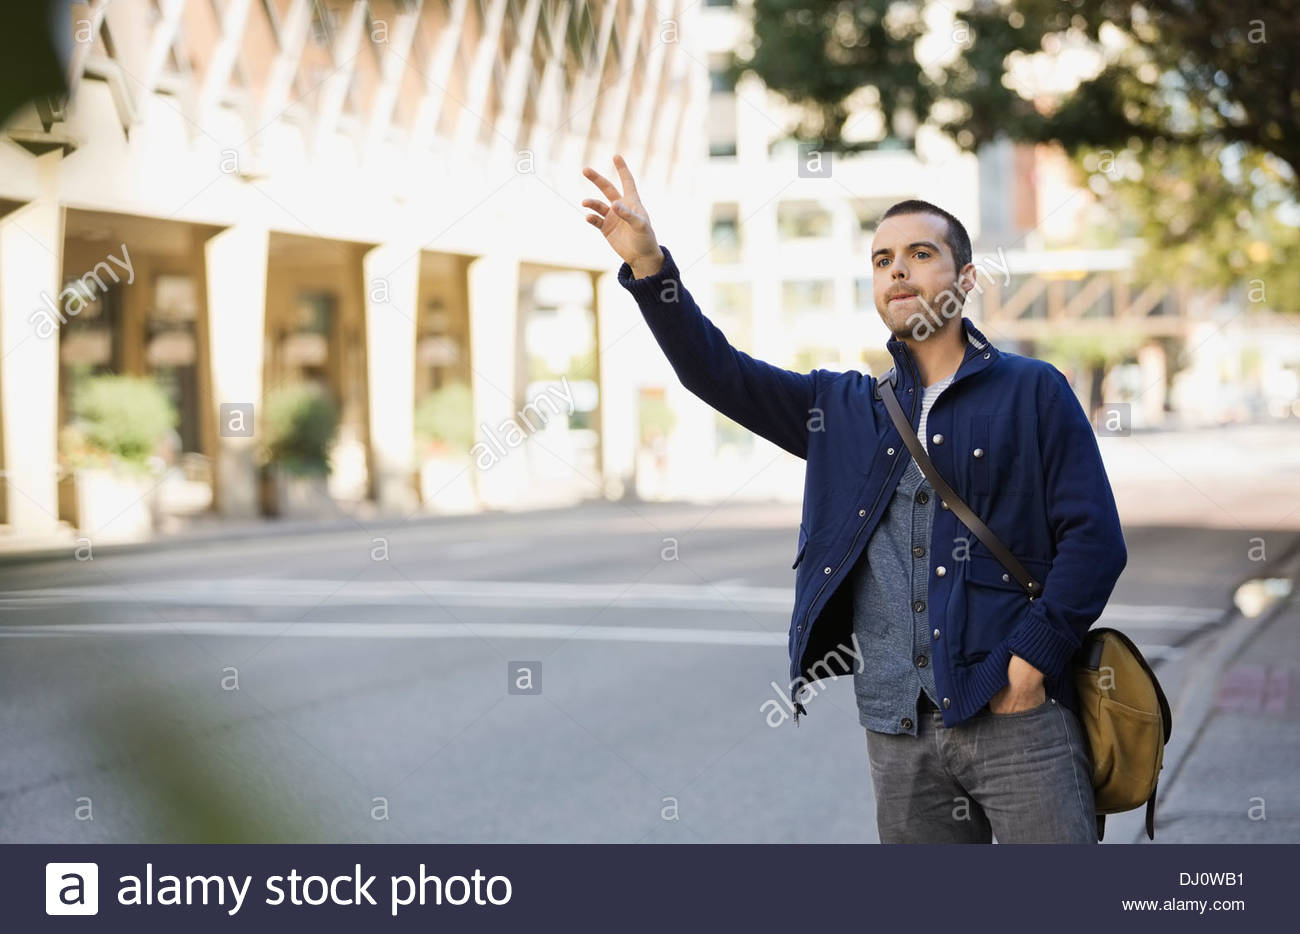 Homme hailing taxi on city street Banque D'Images